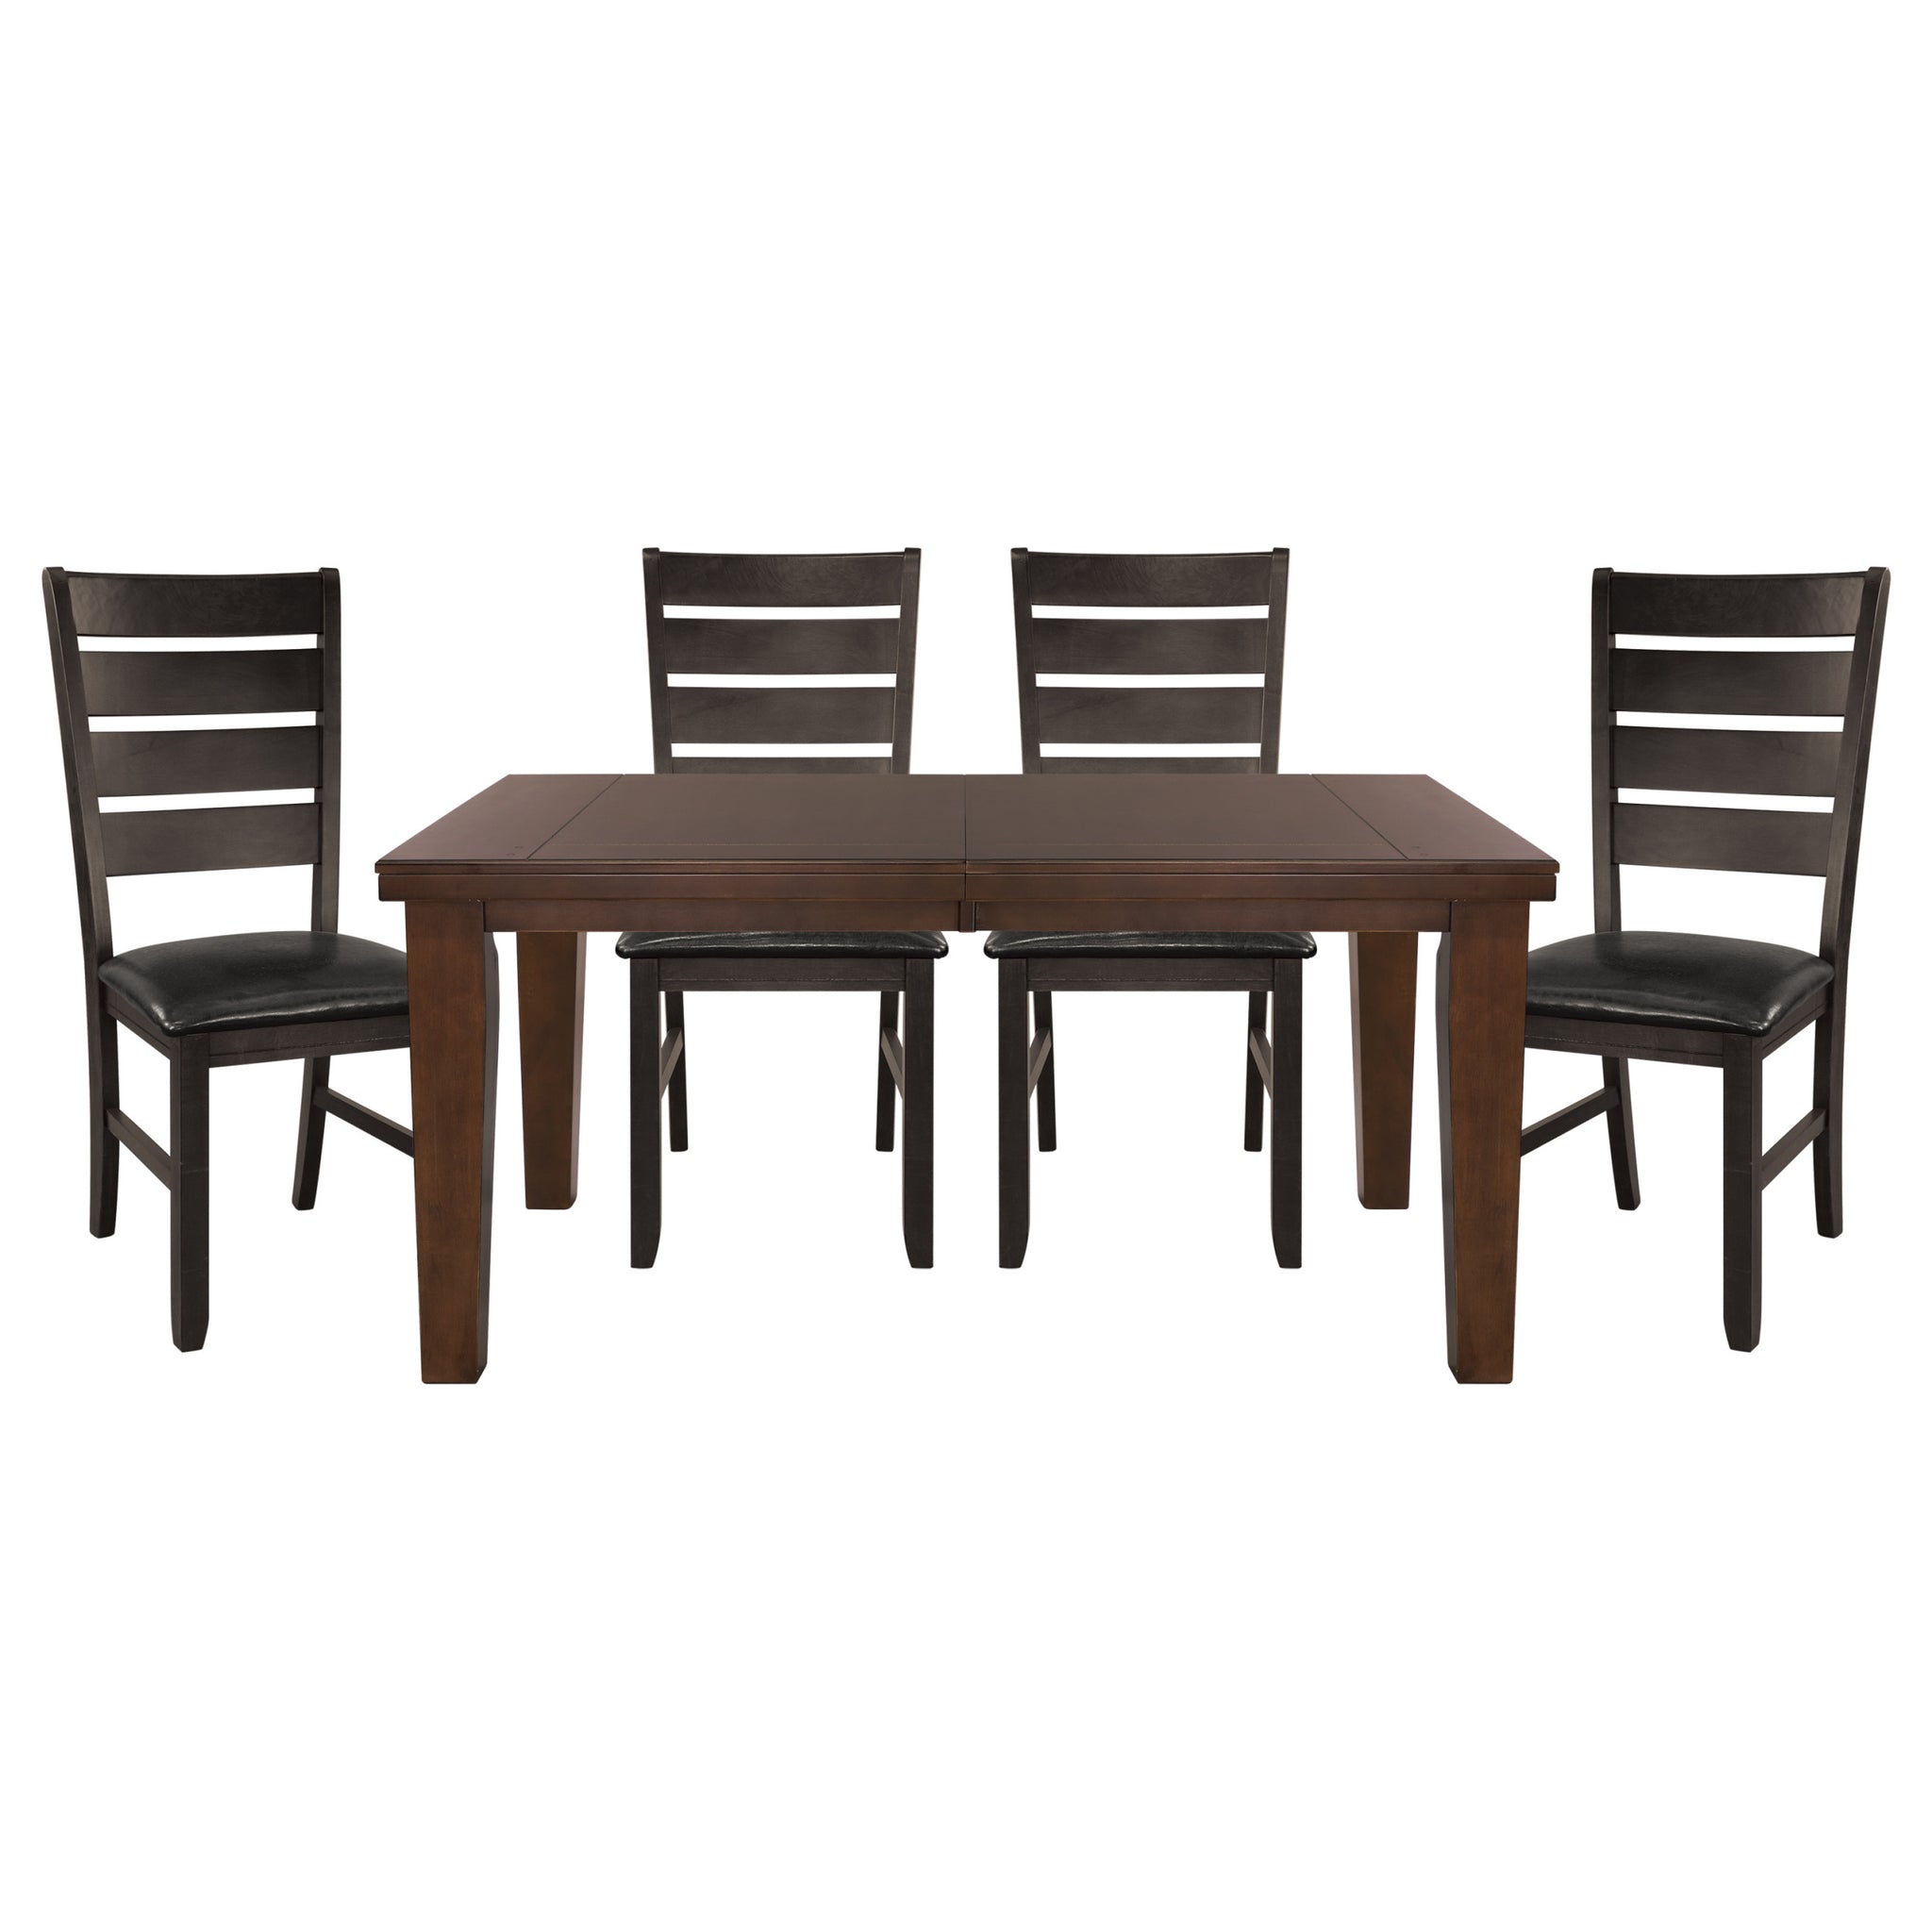 Contemporary Dark Oak Finish Dining 5pc Set Table w wood-wood-brown mix-seats 4-dining